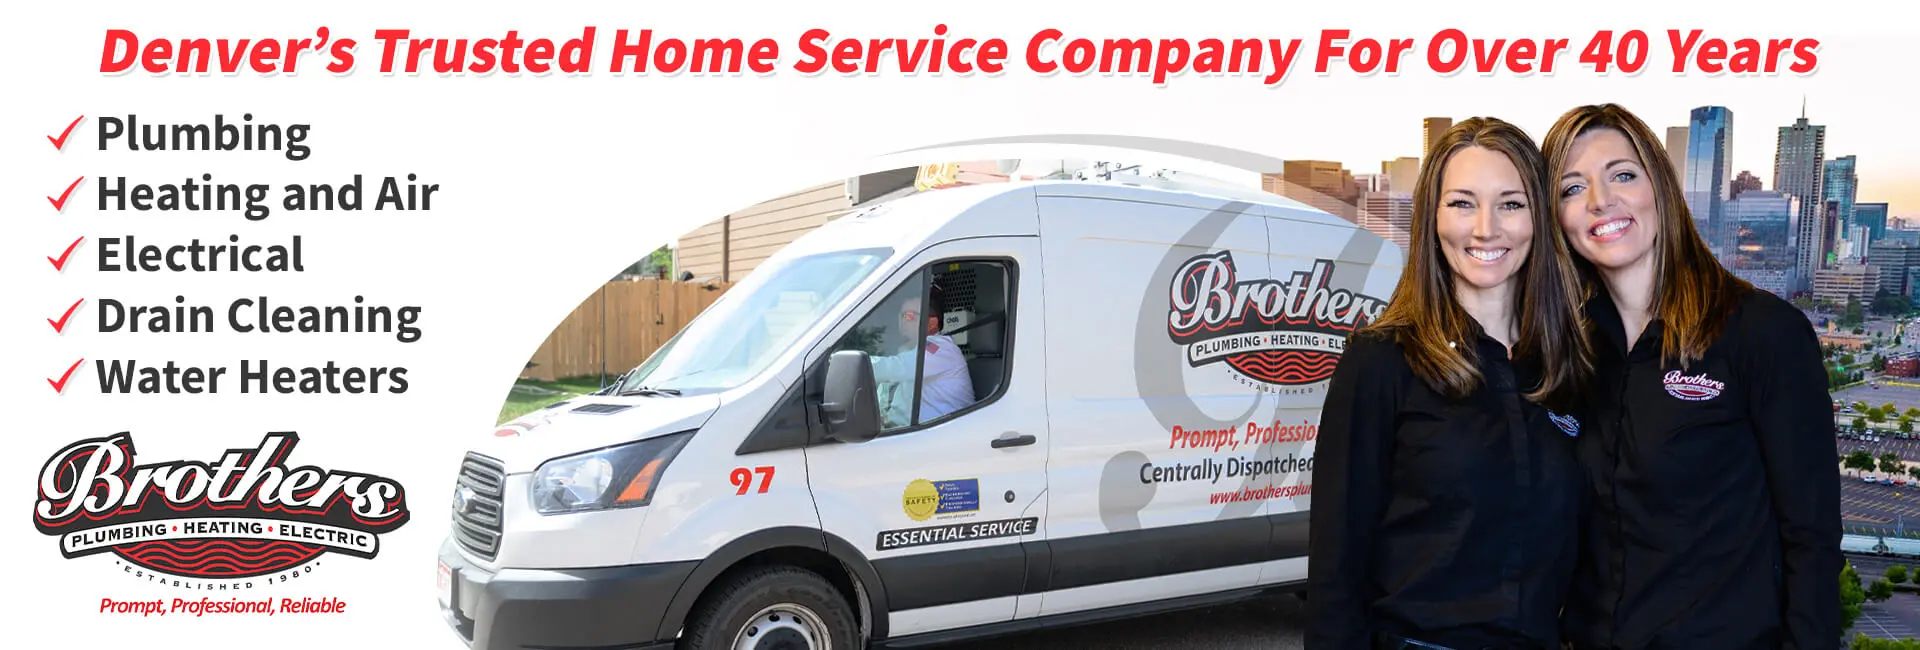 Drain Cleaning - Service Tech Plumbing Heating and Cooling